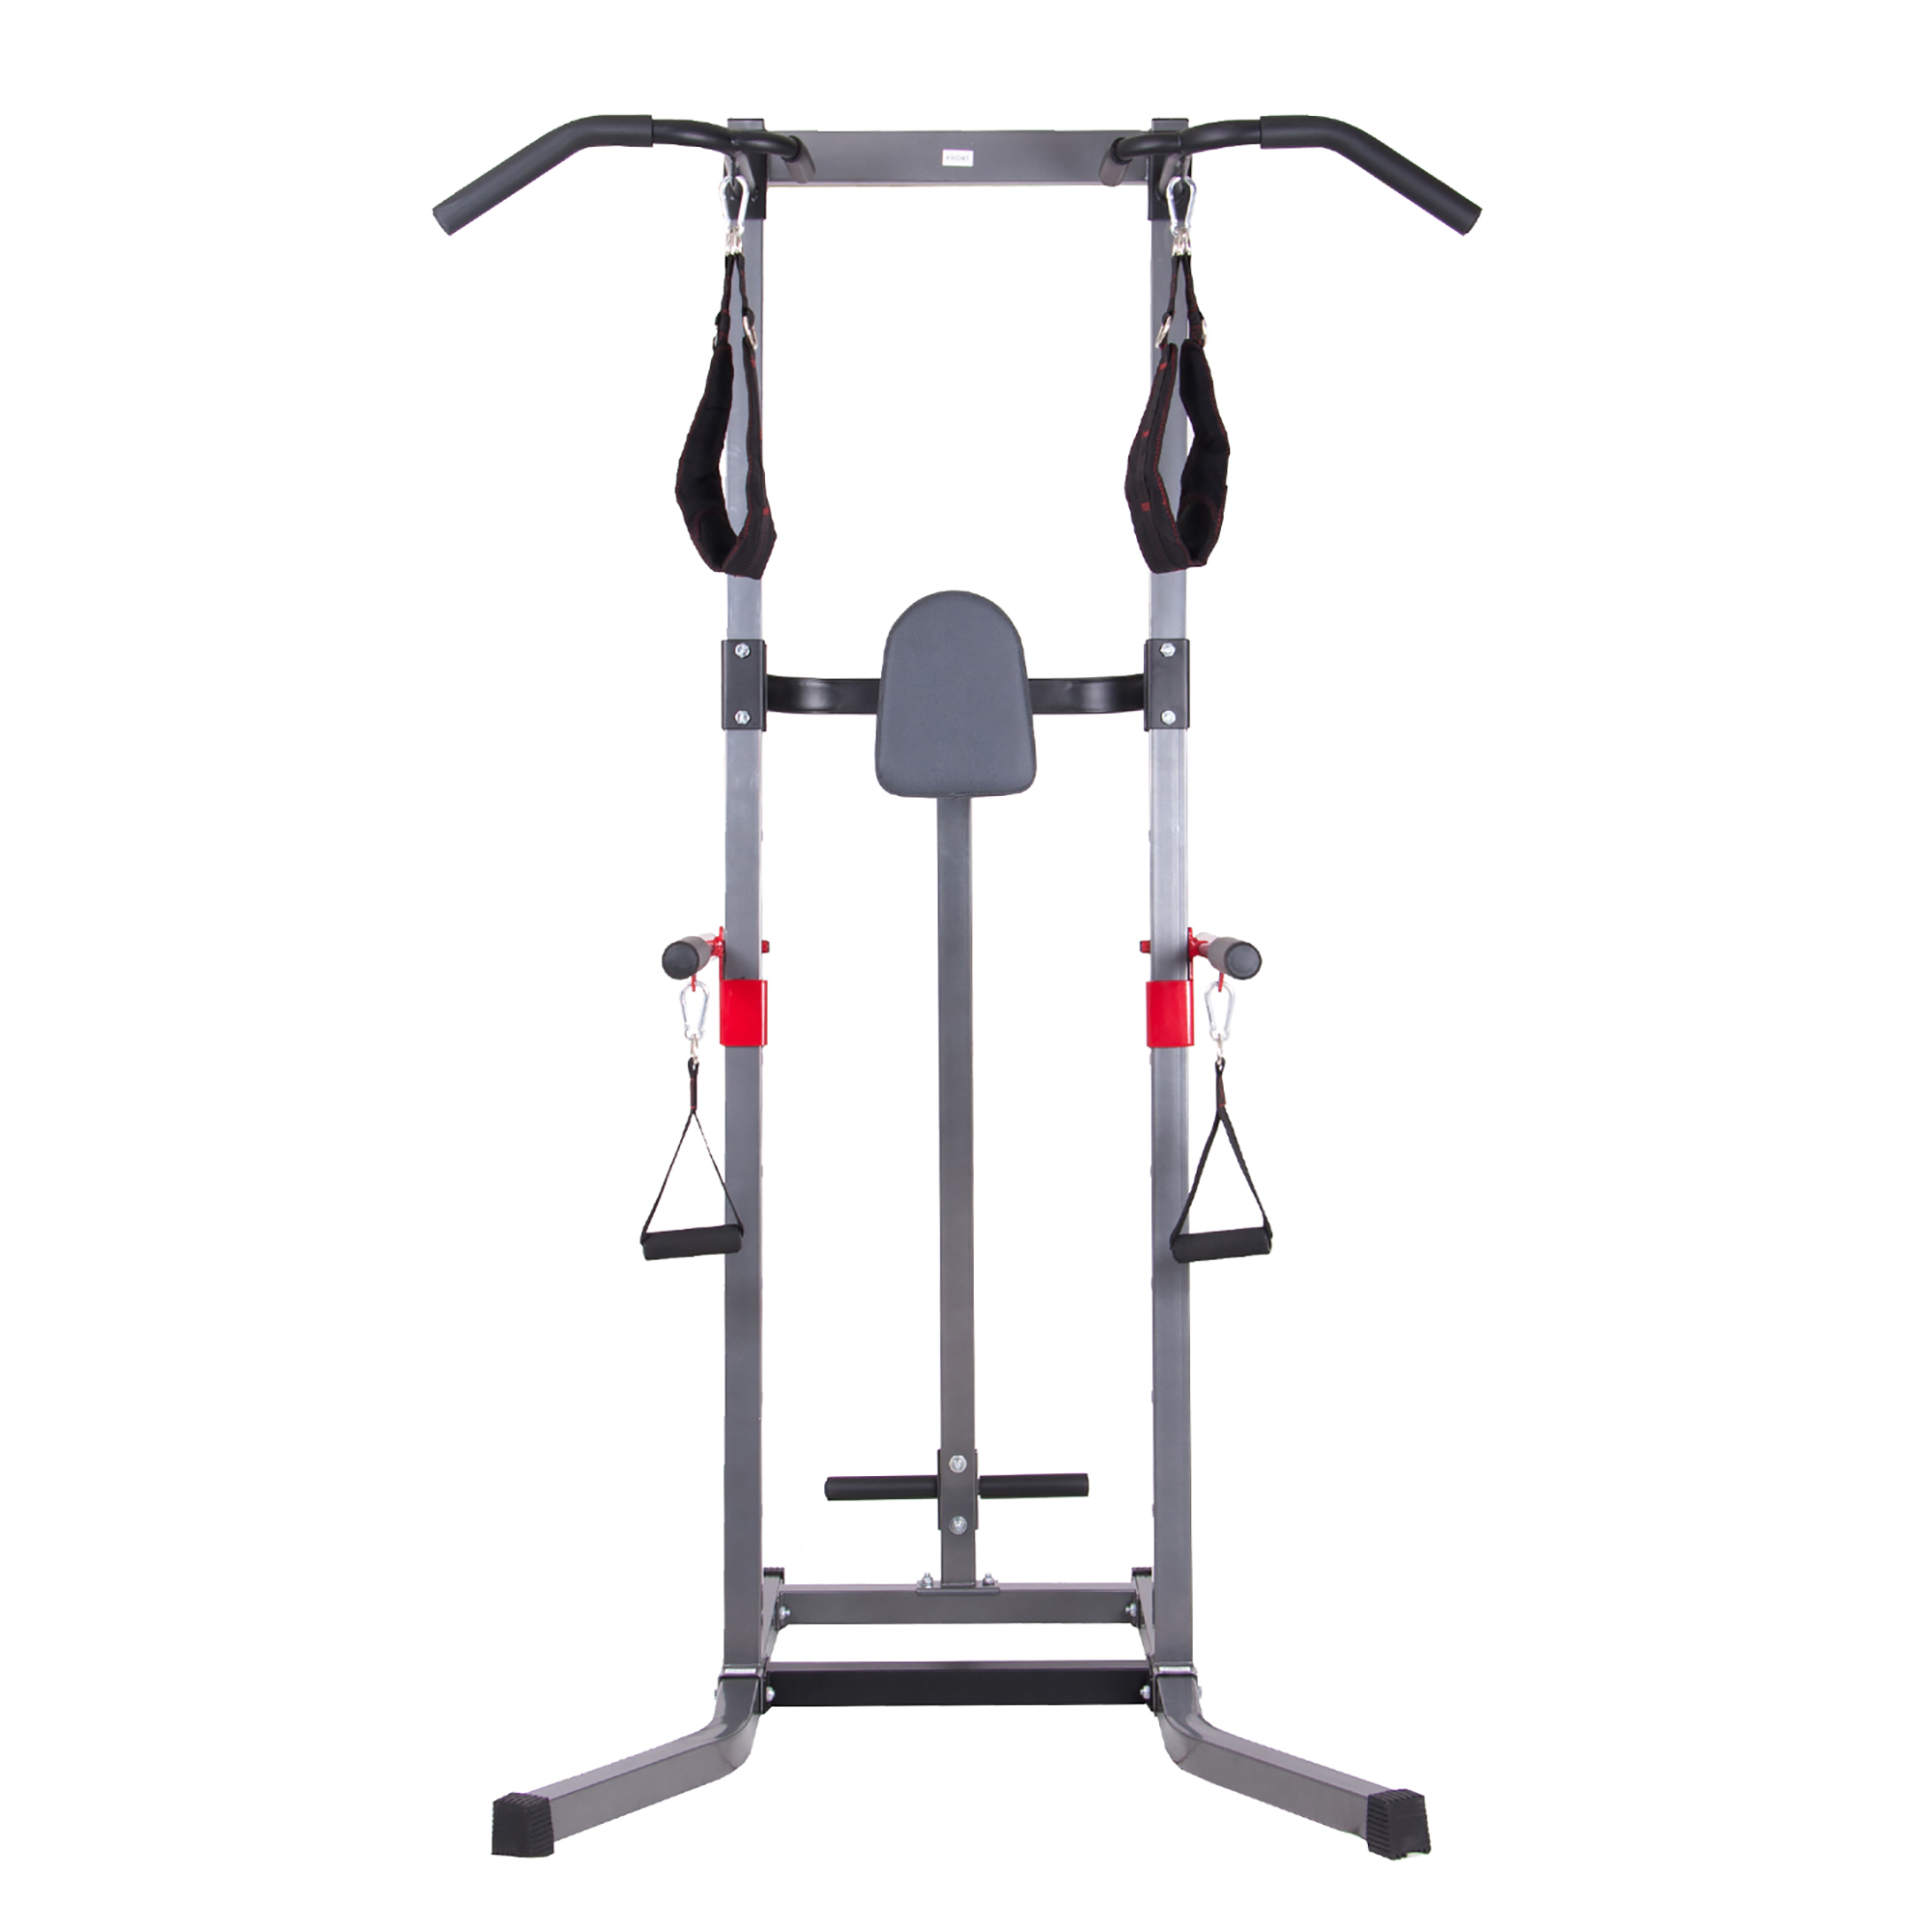 Body Champ VKR2078 5-in-1 Power Tower and Dip Station, Home Gym Equipment - image 4 of 9